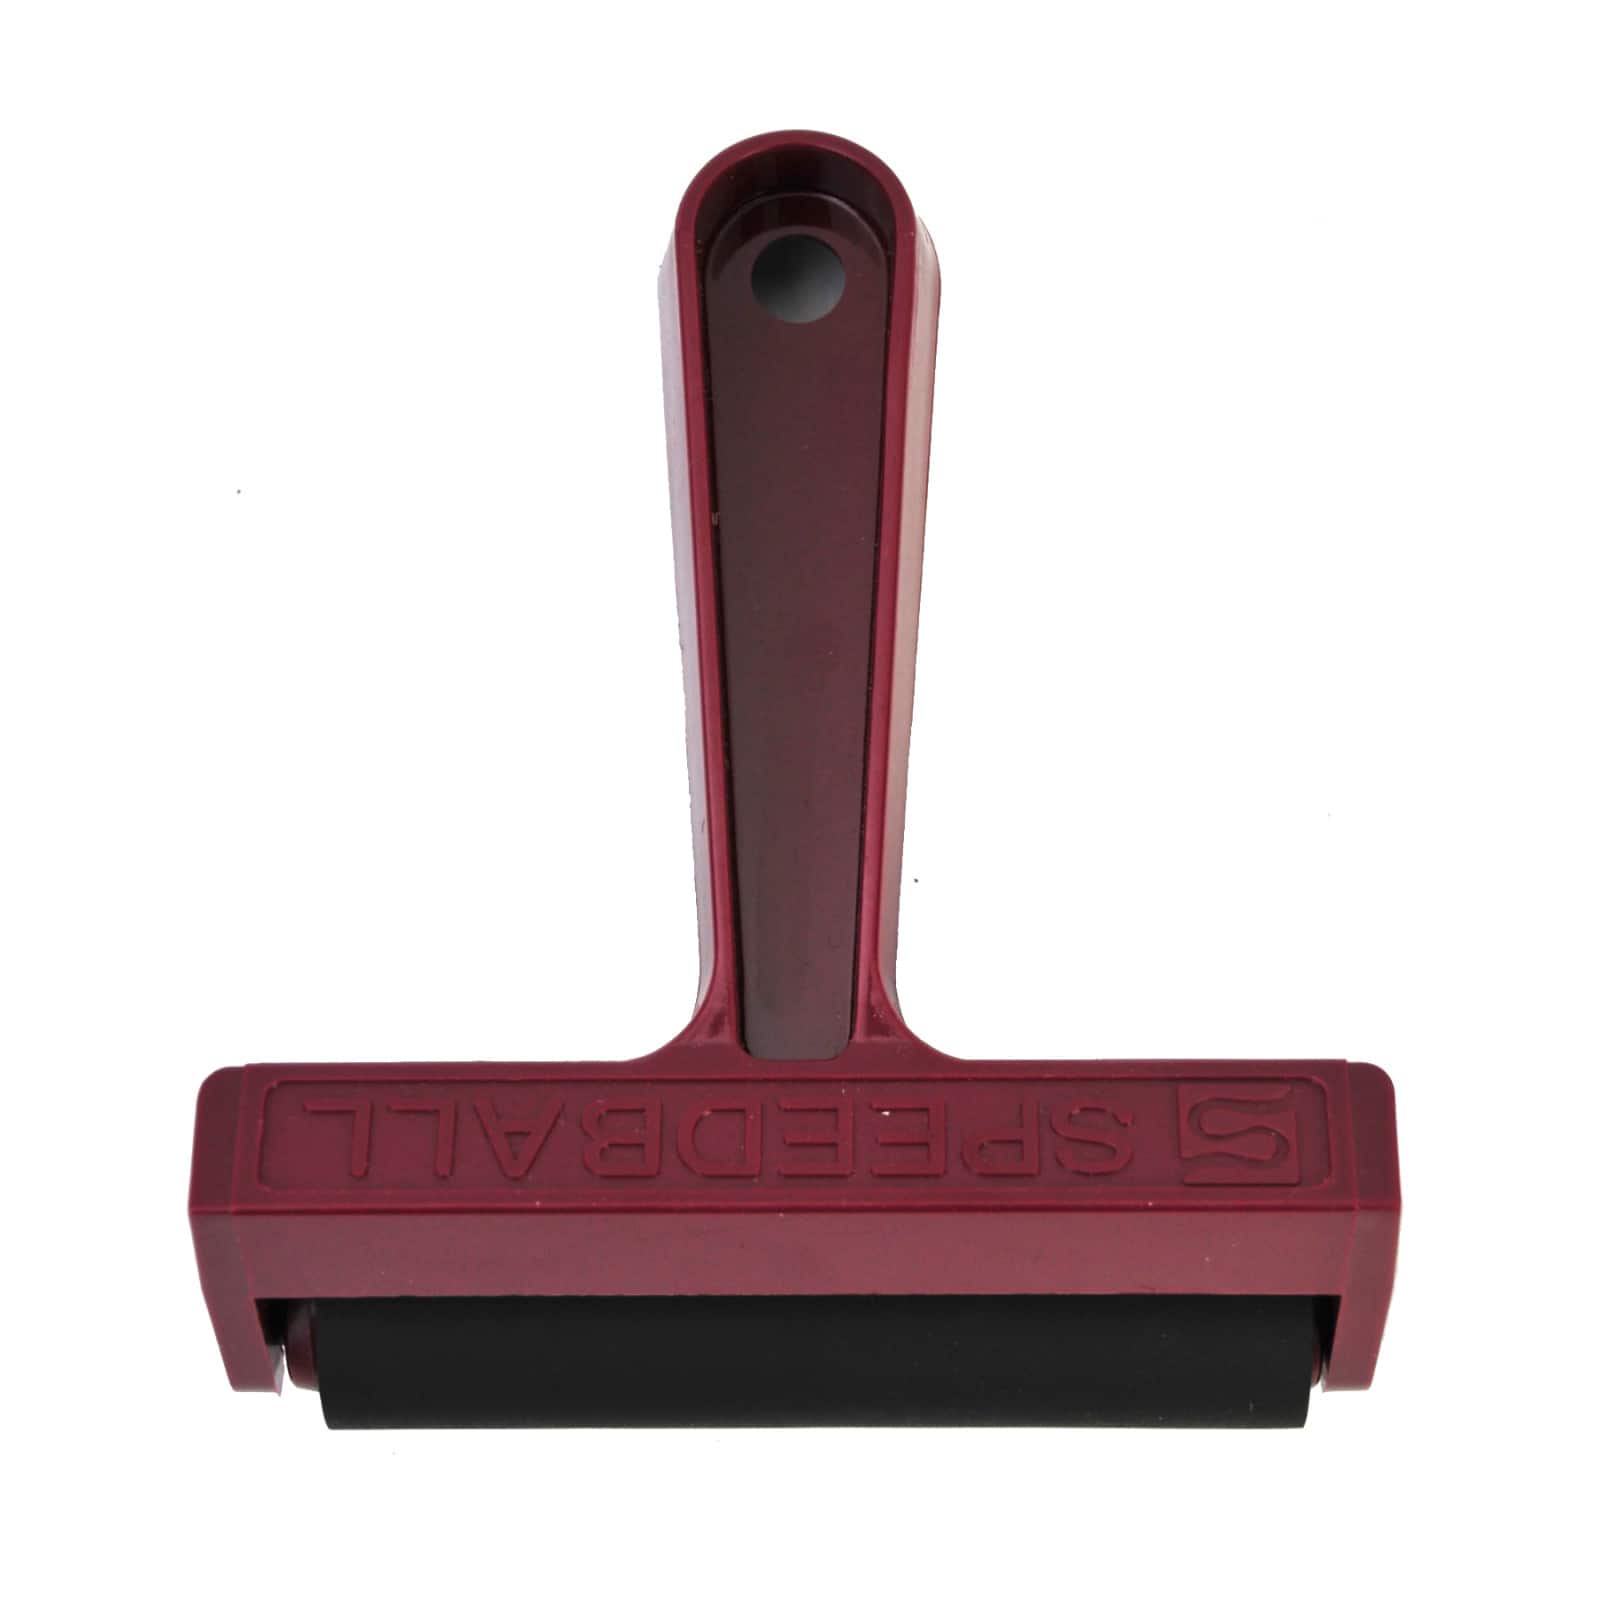 Speedball Pop-In Soft Rubber Brayer with Plastic Frame, 4 Inches